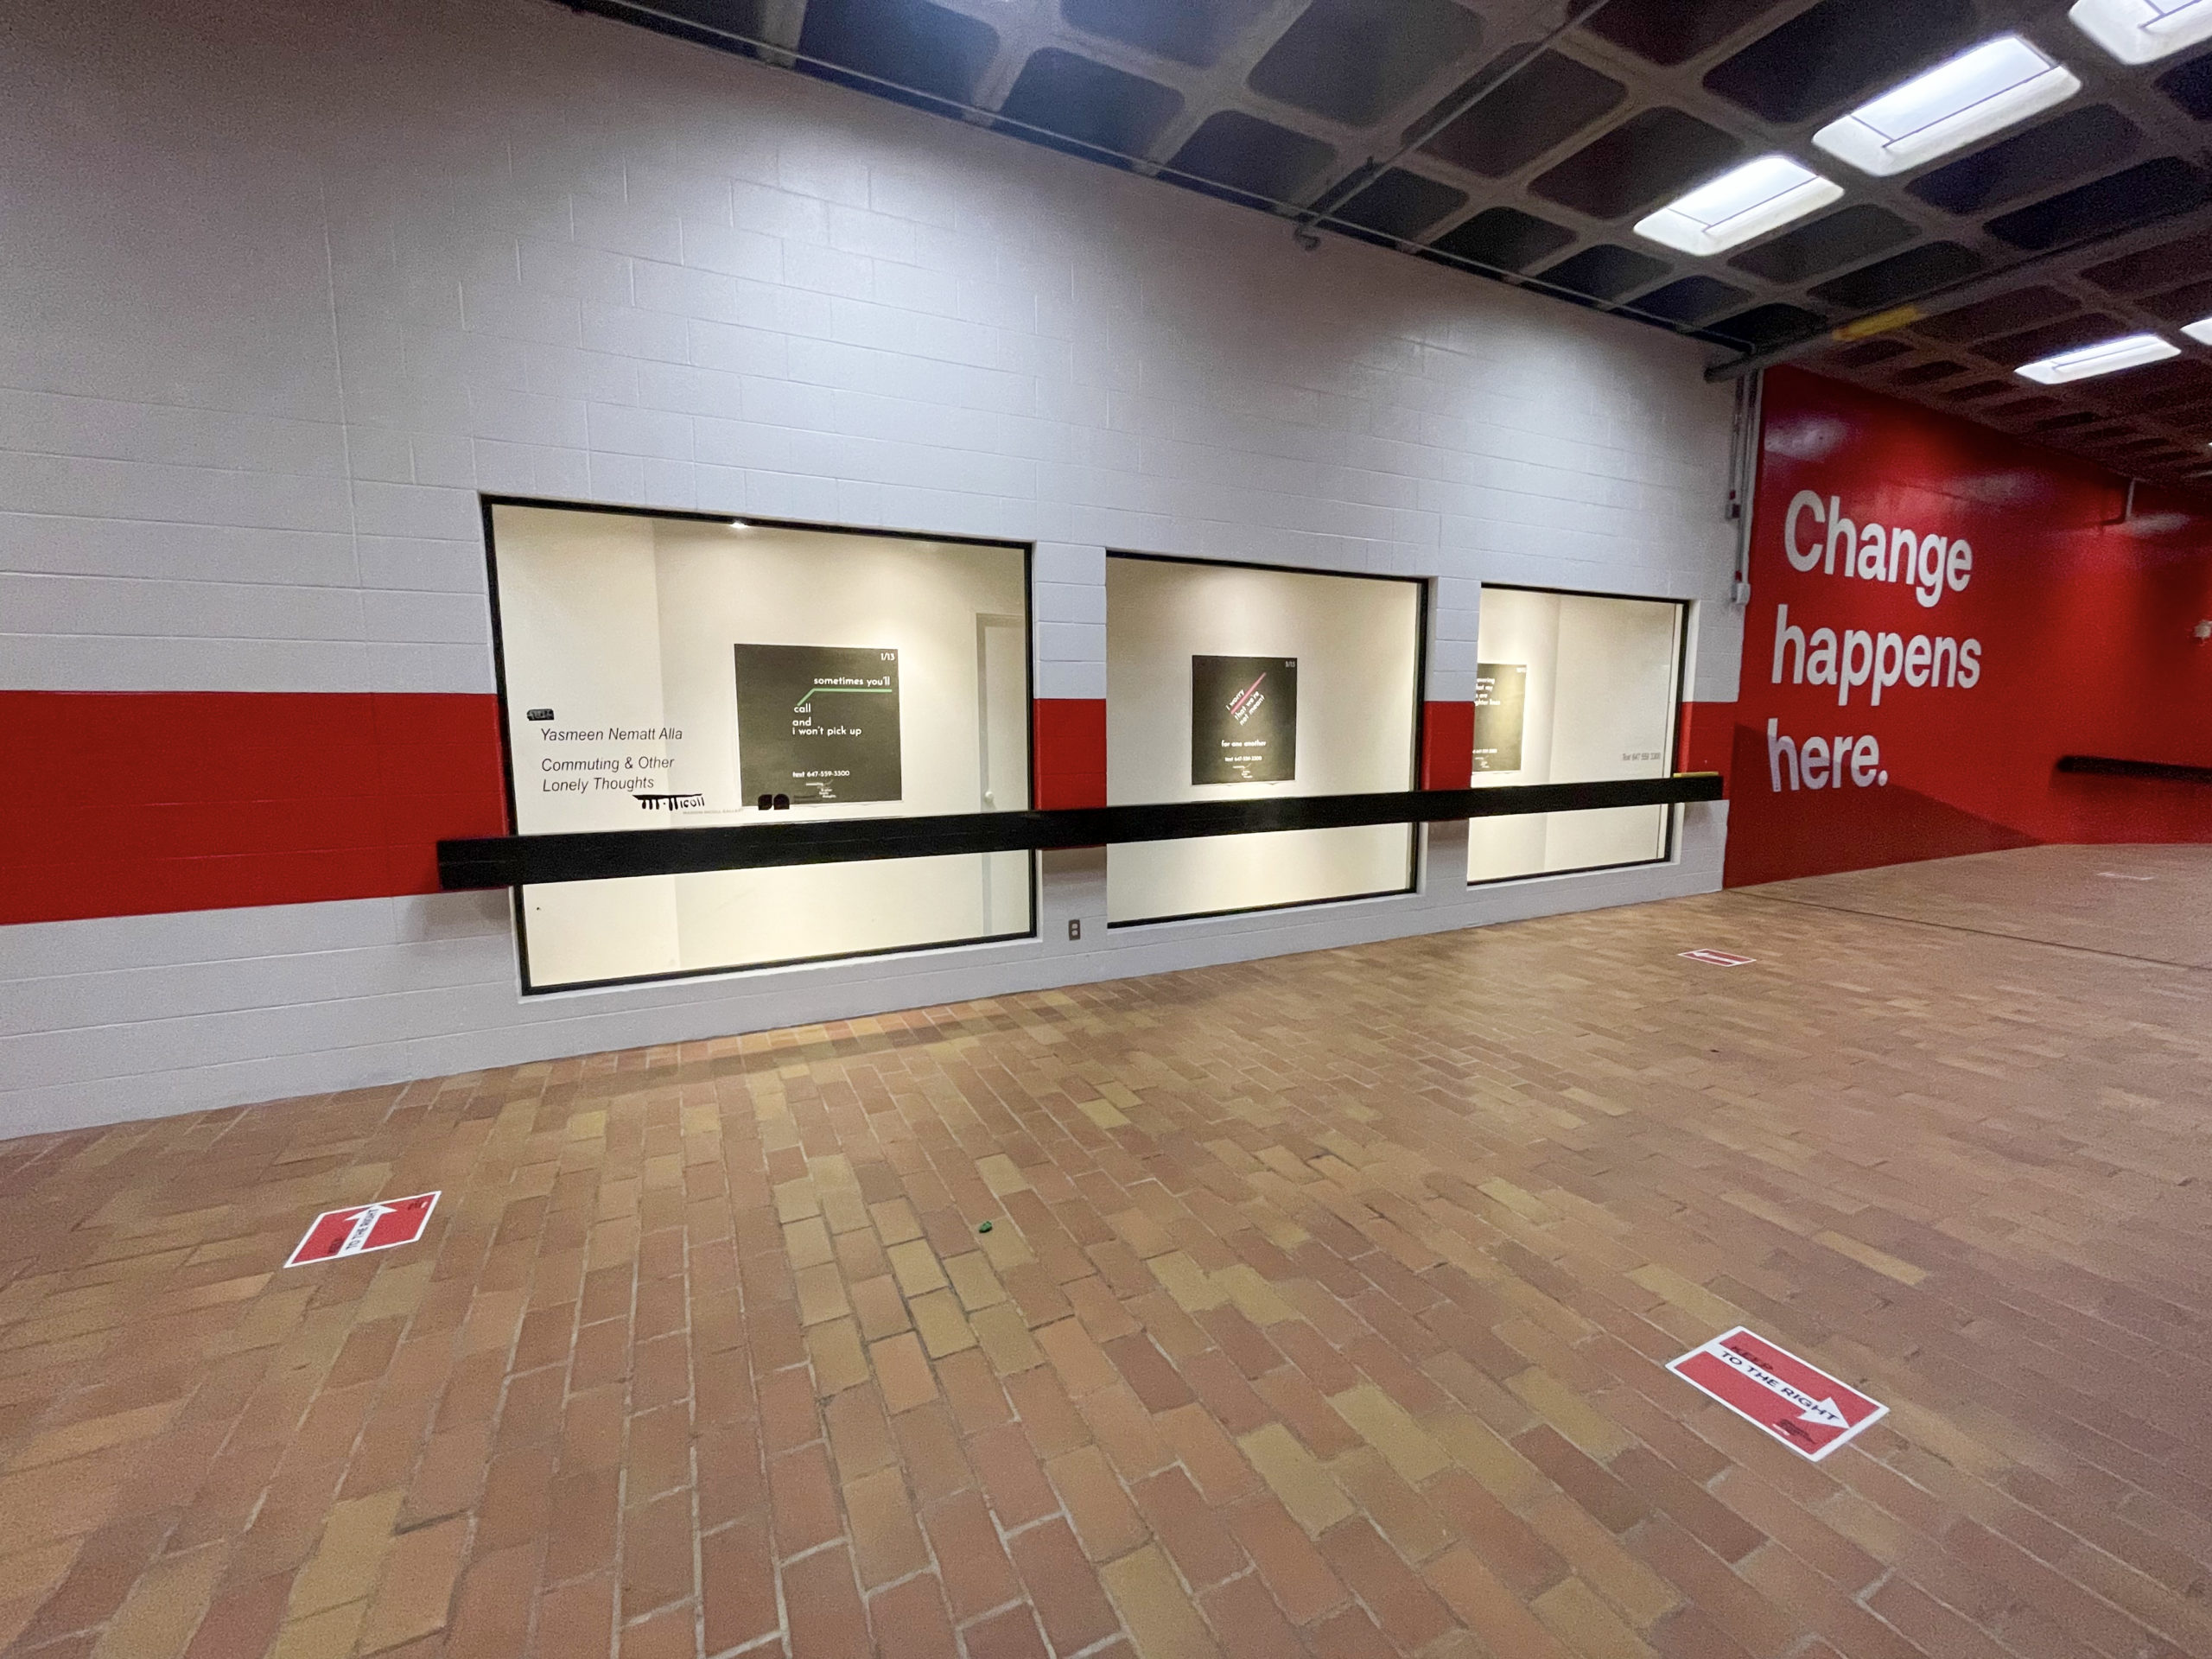 Photo of Yasmeen Nematt Alla's poster installation at Marion Nicoll Gallery in Alberta. The wall is while with a painted red stripe, and brown tile floor